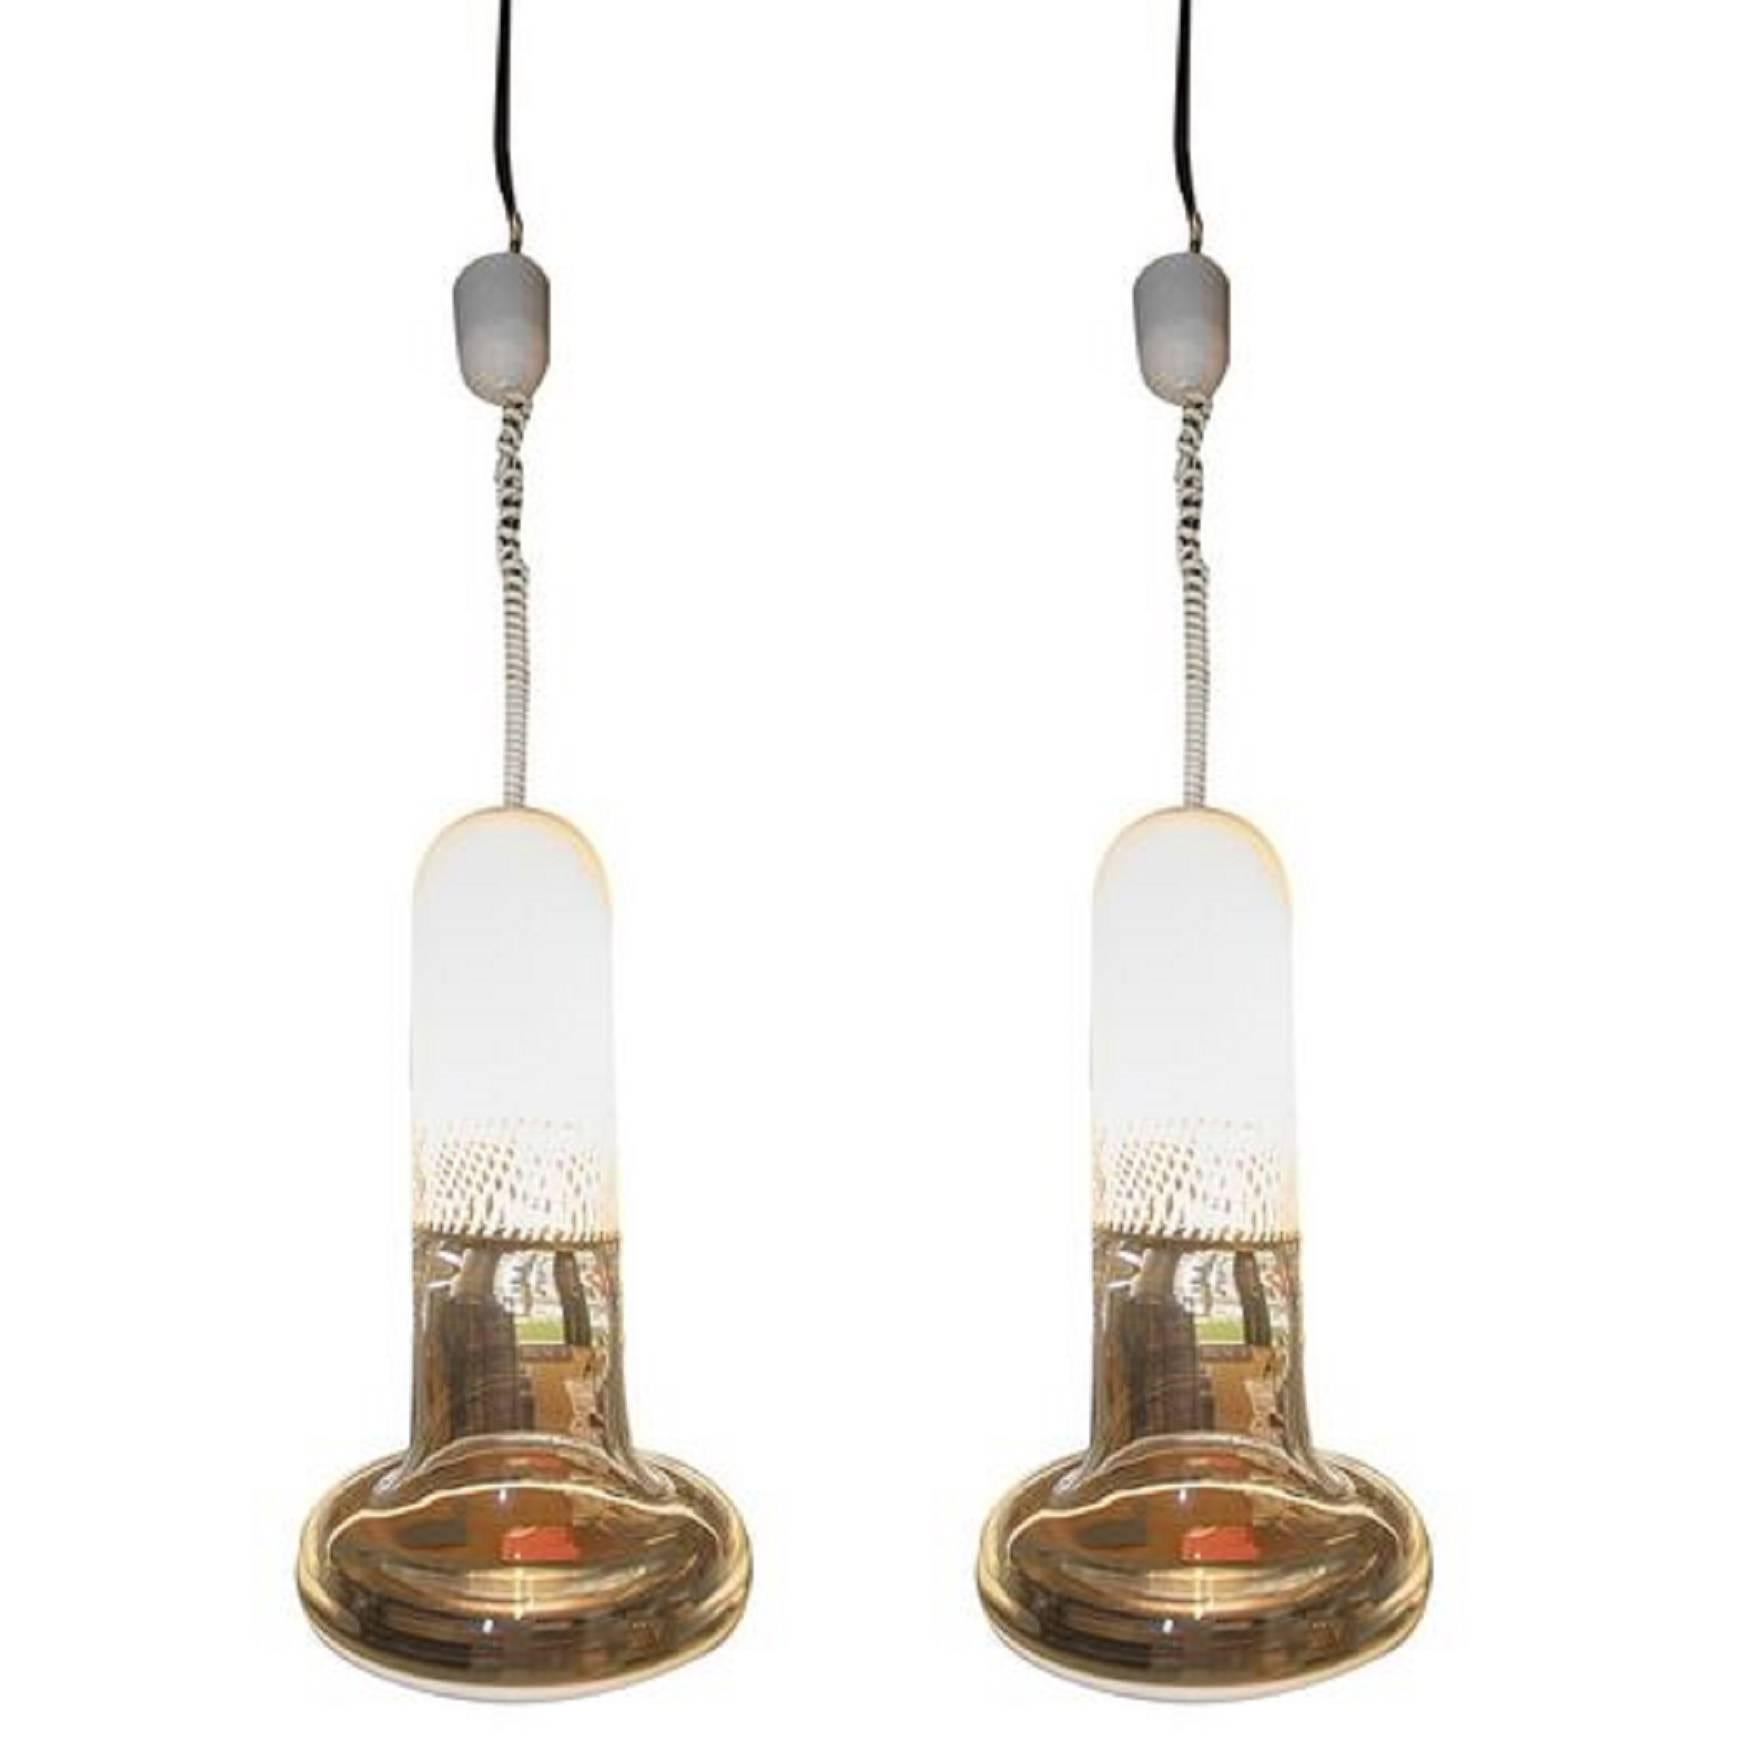 Pair of Mid-Century Murano Glass Ceiling Lamps by VeArt, Venice, Italy, 1960s